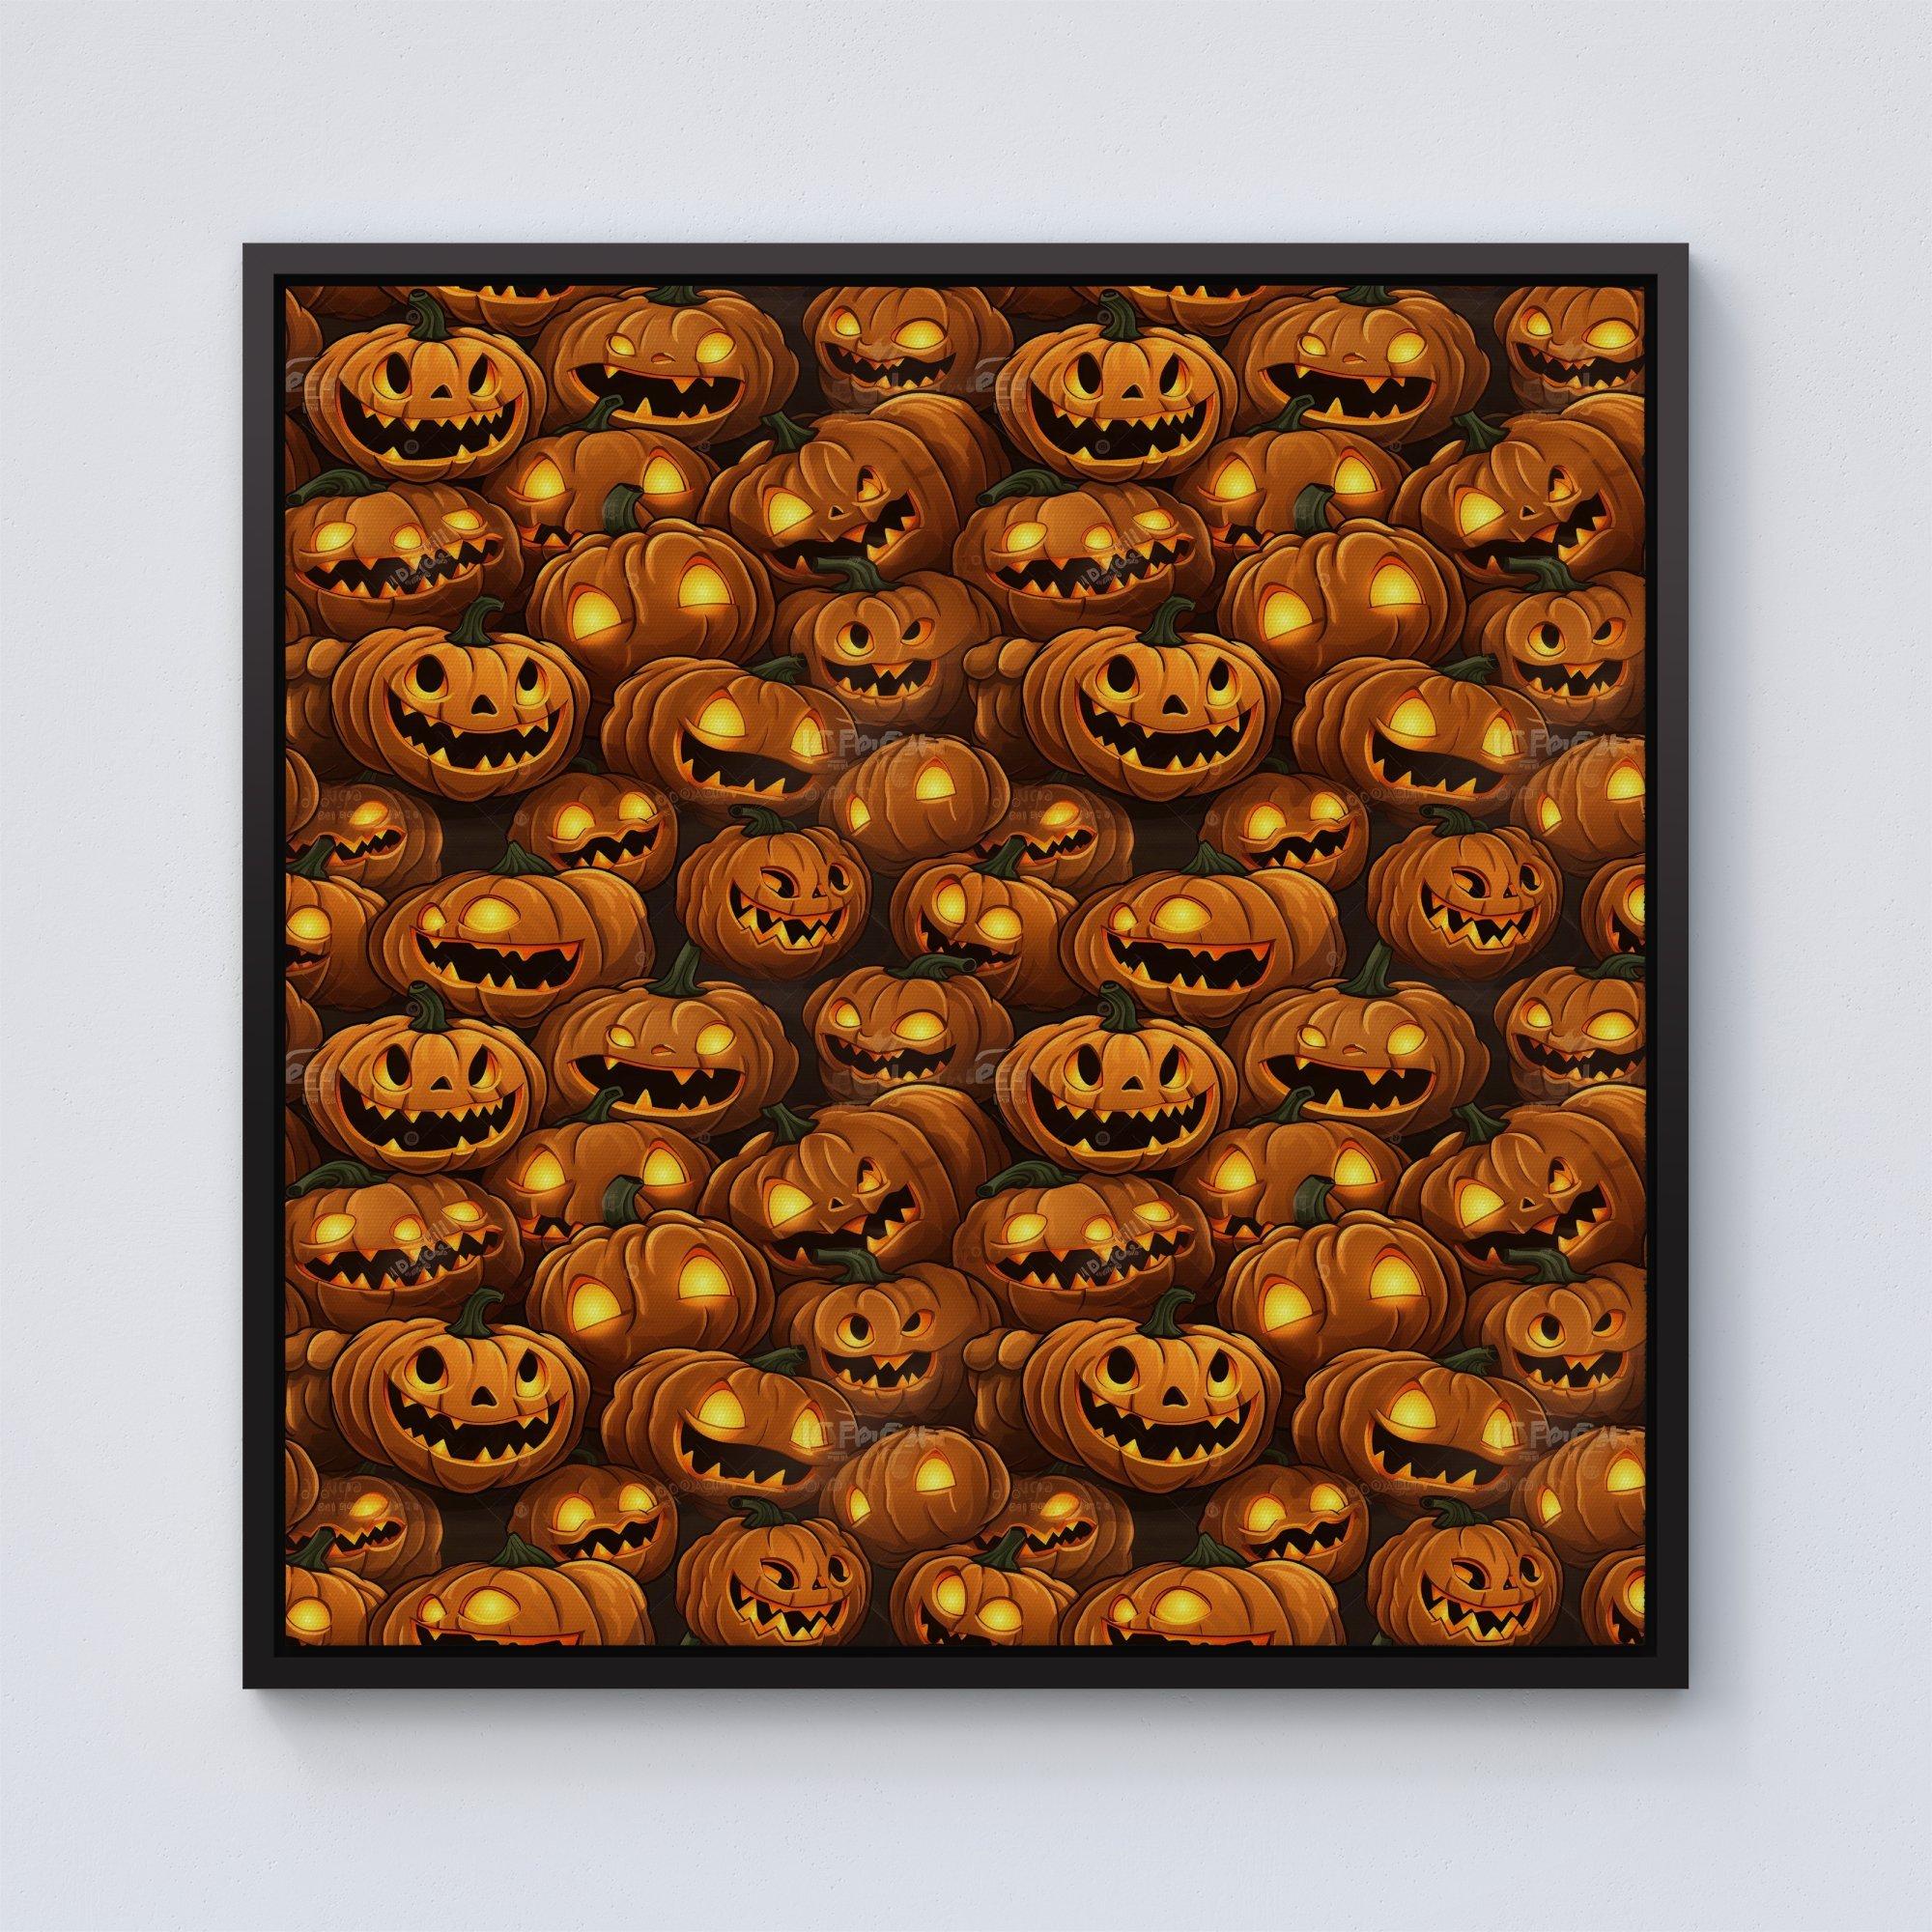 Grinning Lanterns Pumpkins With Glowing Eyes Framed Canvas